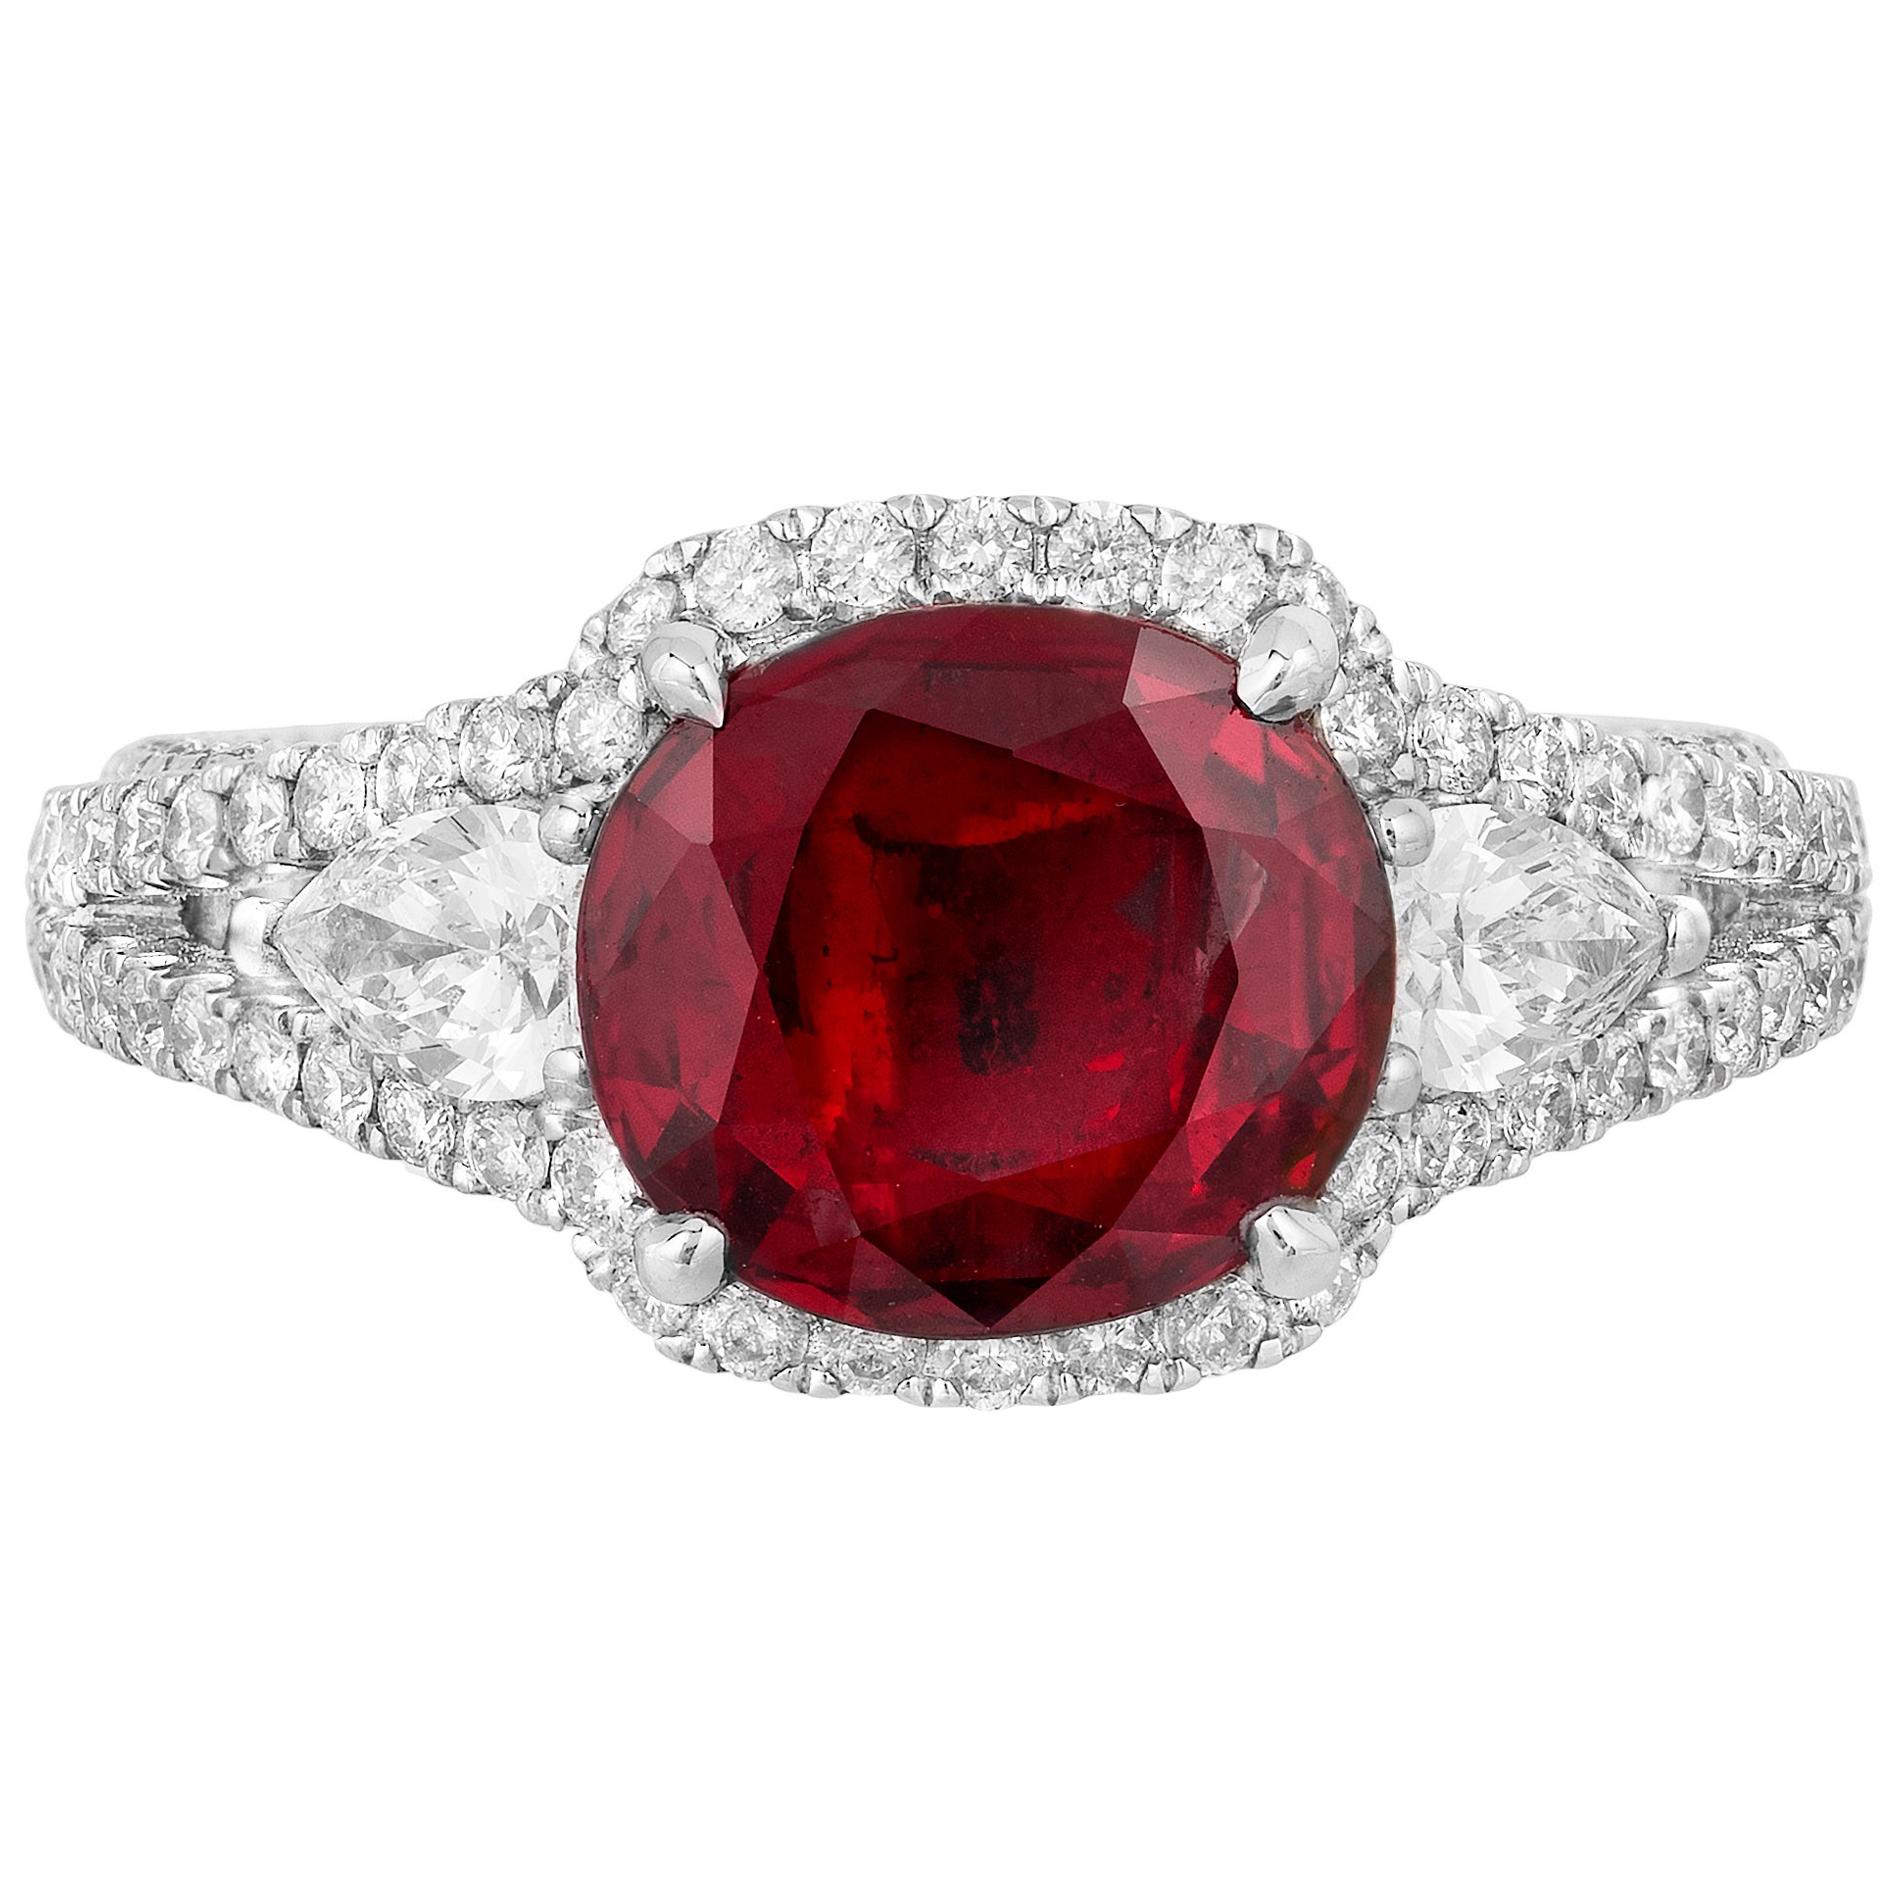 Andreoli GIA Certified 1.98 Carat Pigeon Blood Ruby Thailand Diamond Ring 